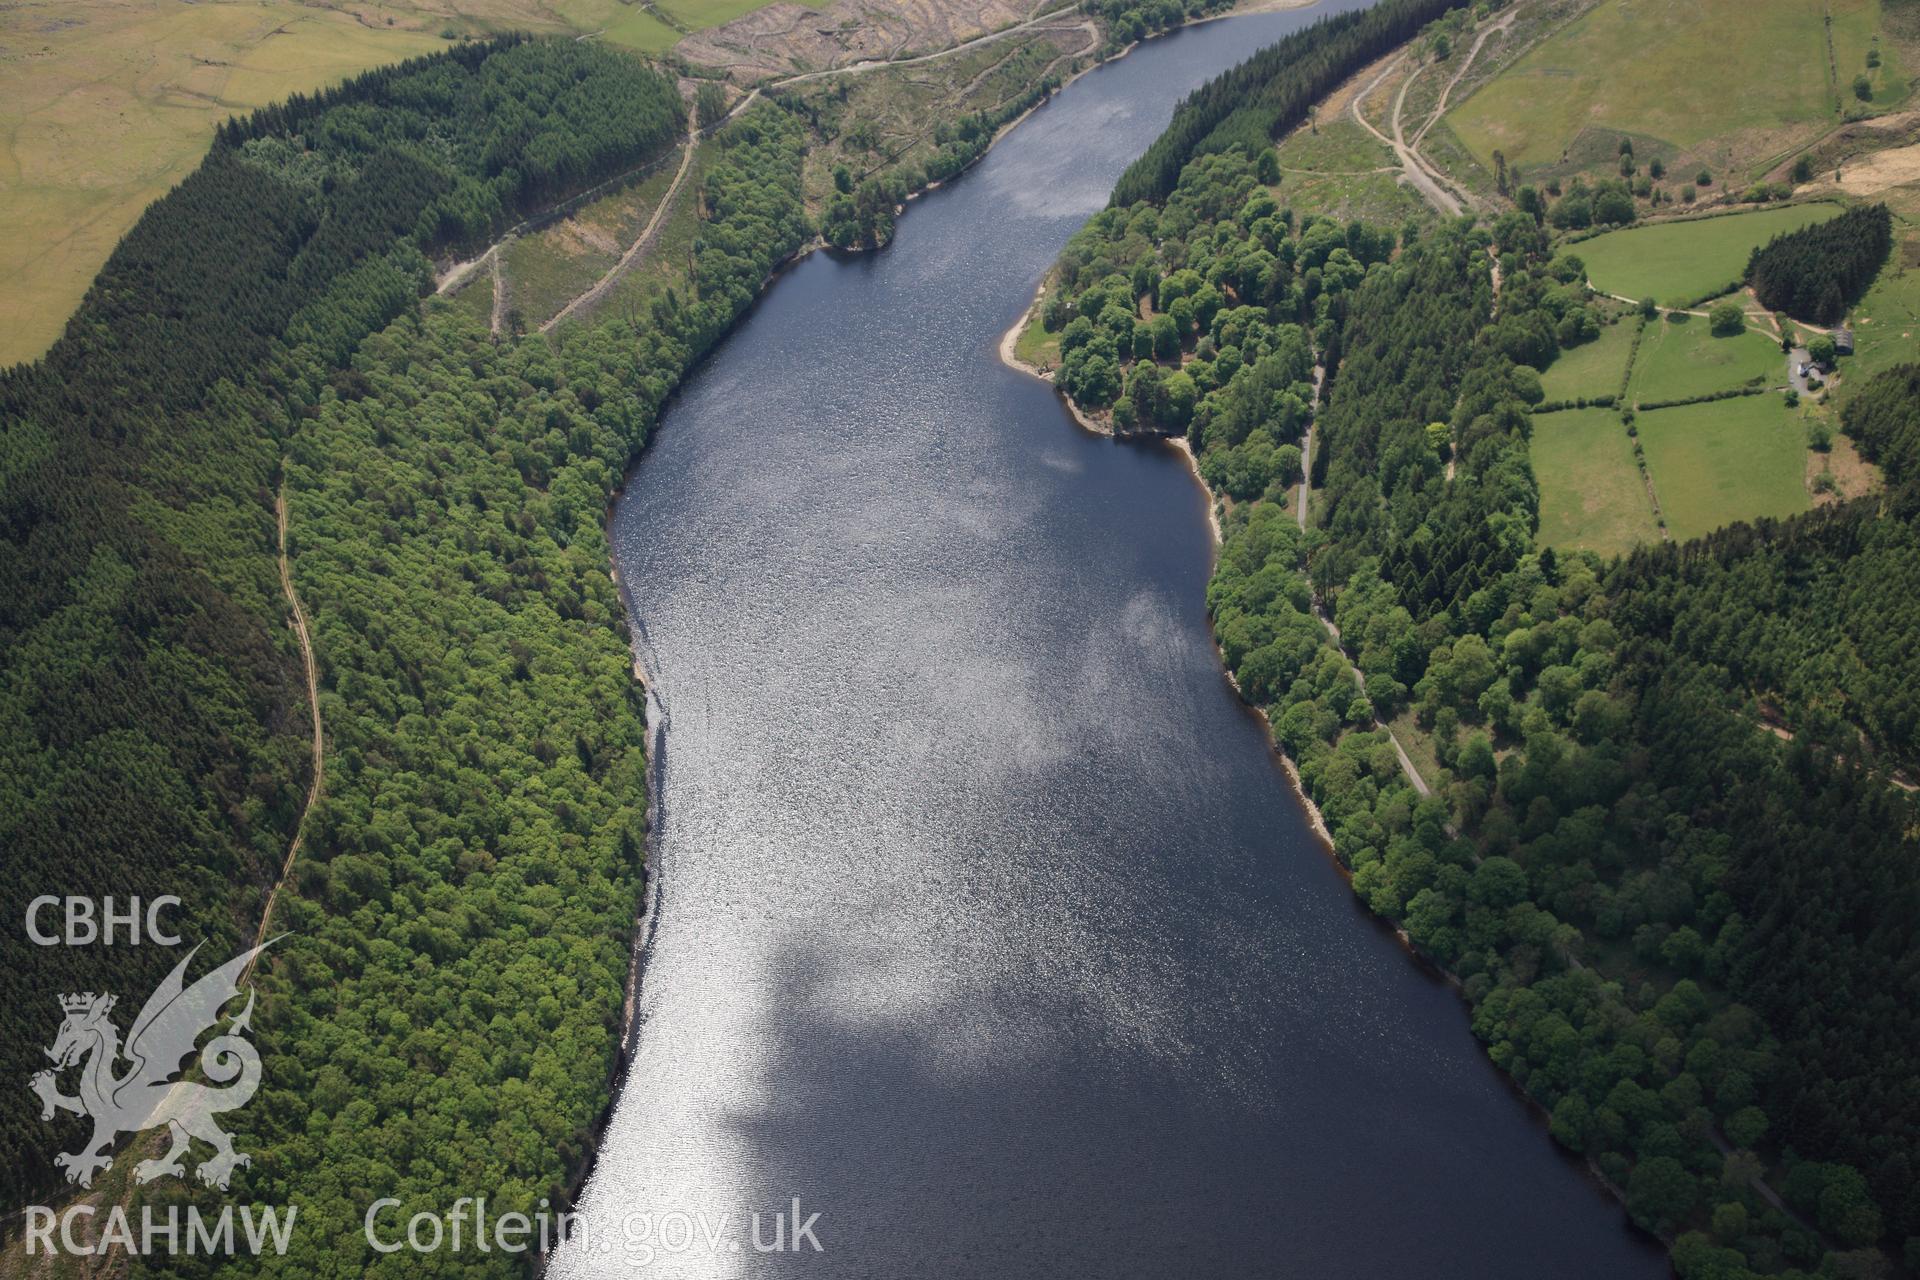 RCAHMW colour oblique photograph of Caban Coch Resevoir, Elan Valley Water Scheme. Taken by Toby Driver on 28/05/2012.